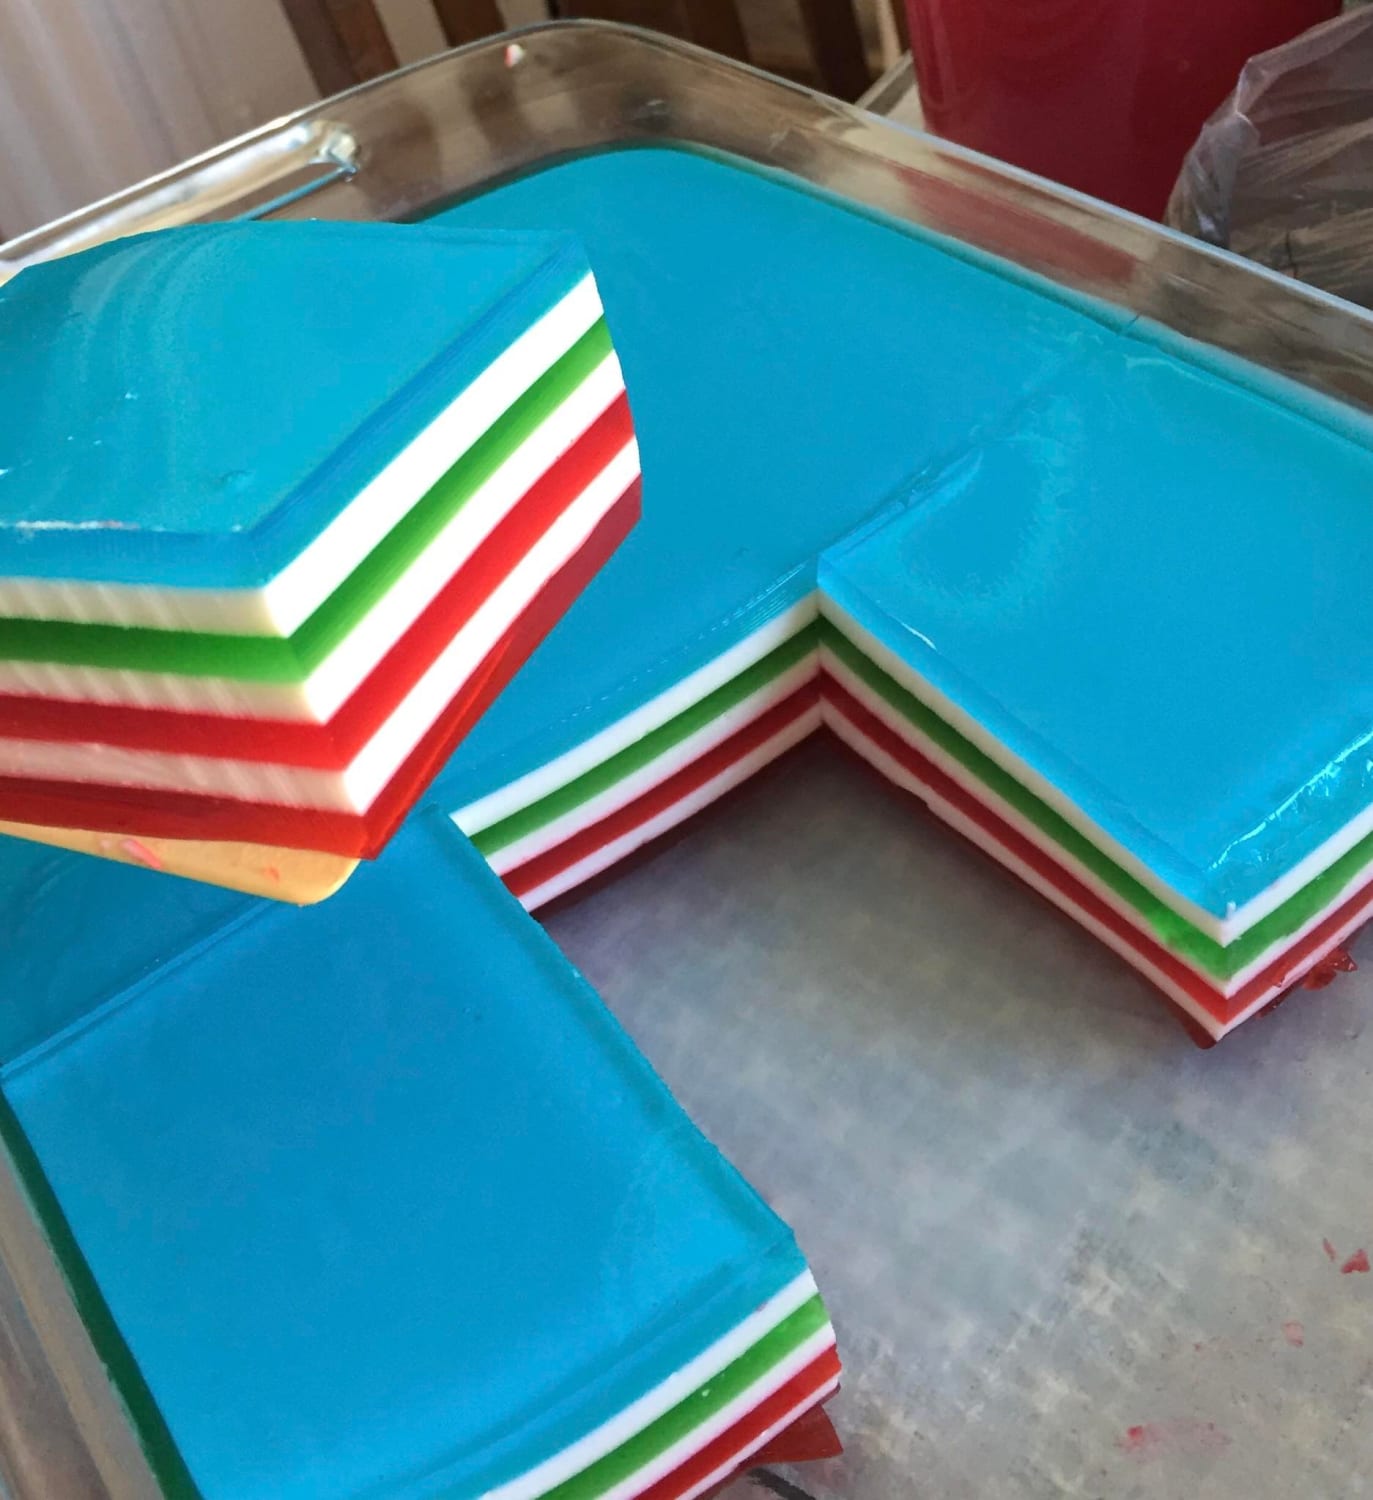 Someone on r/foodporn suggested I put my 7 layer jello here